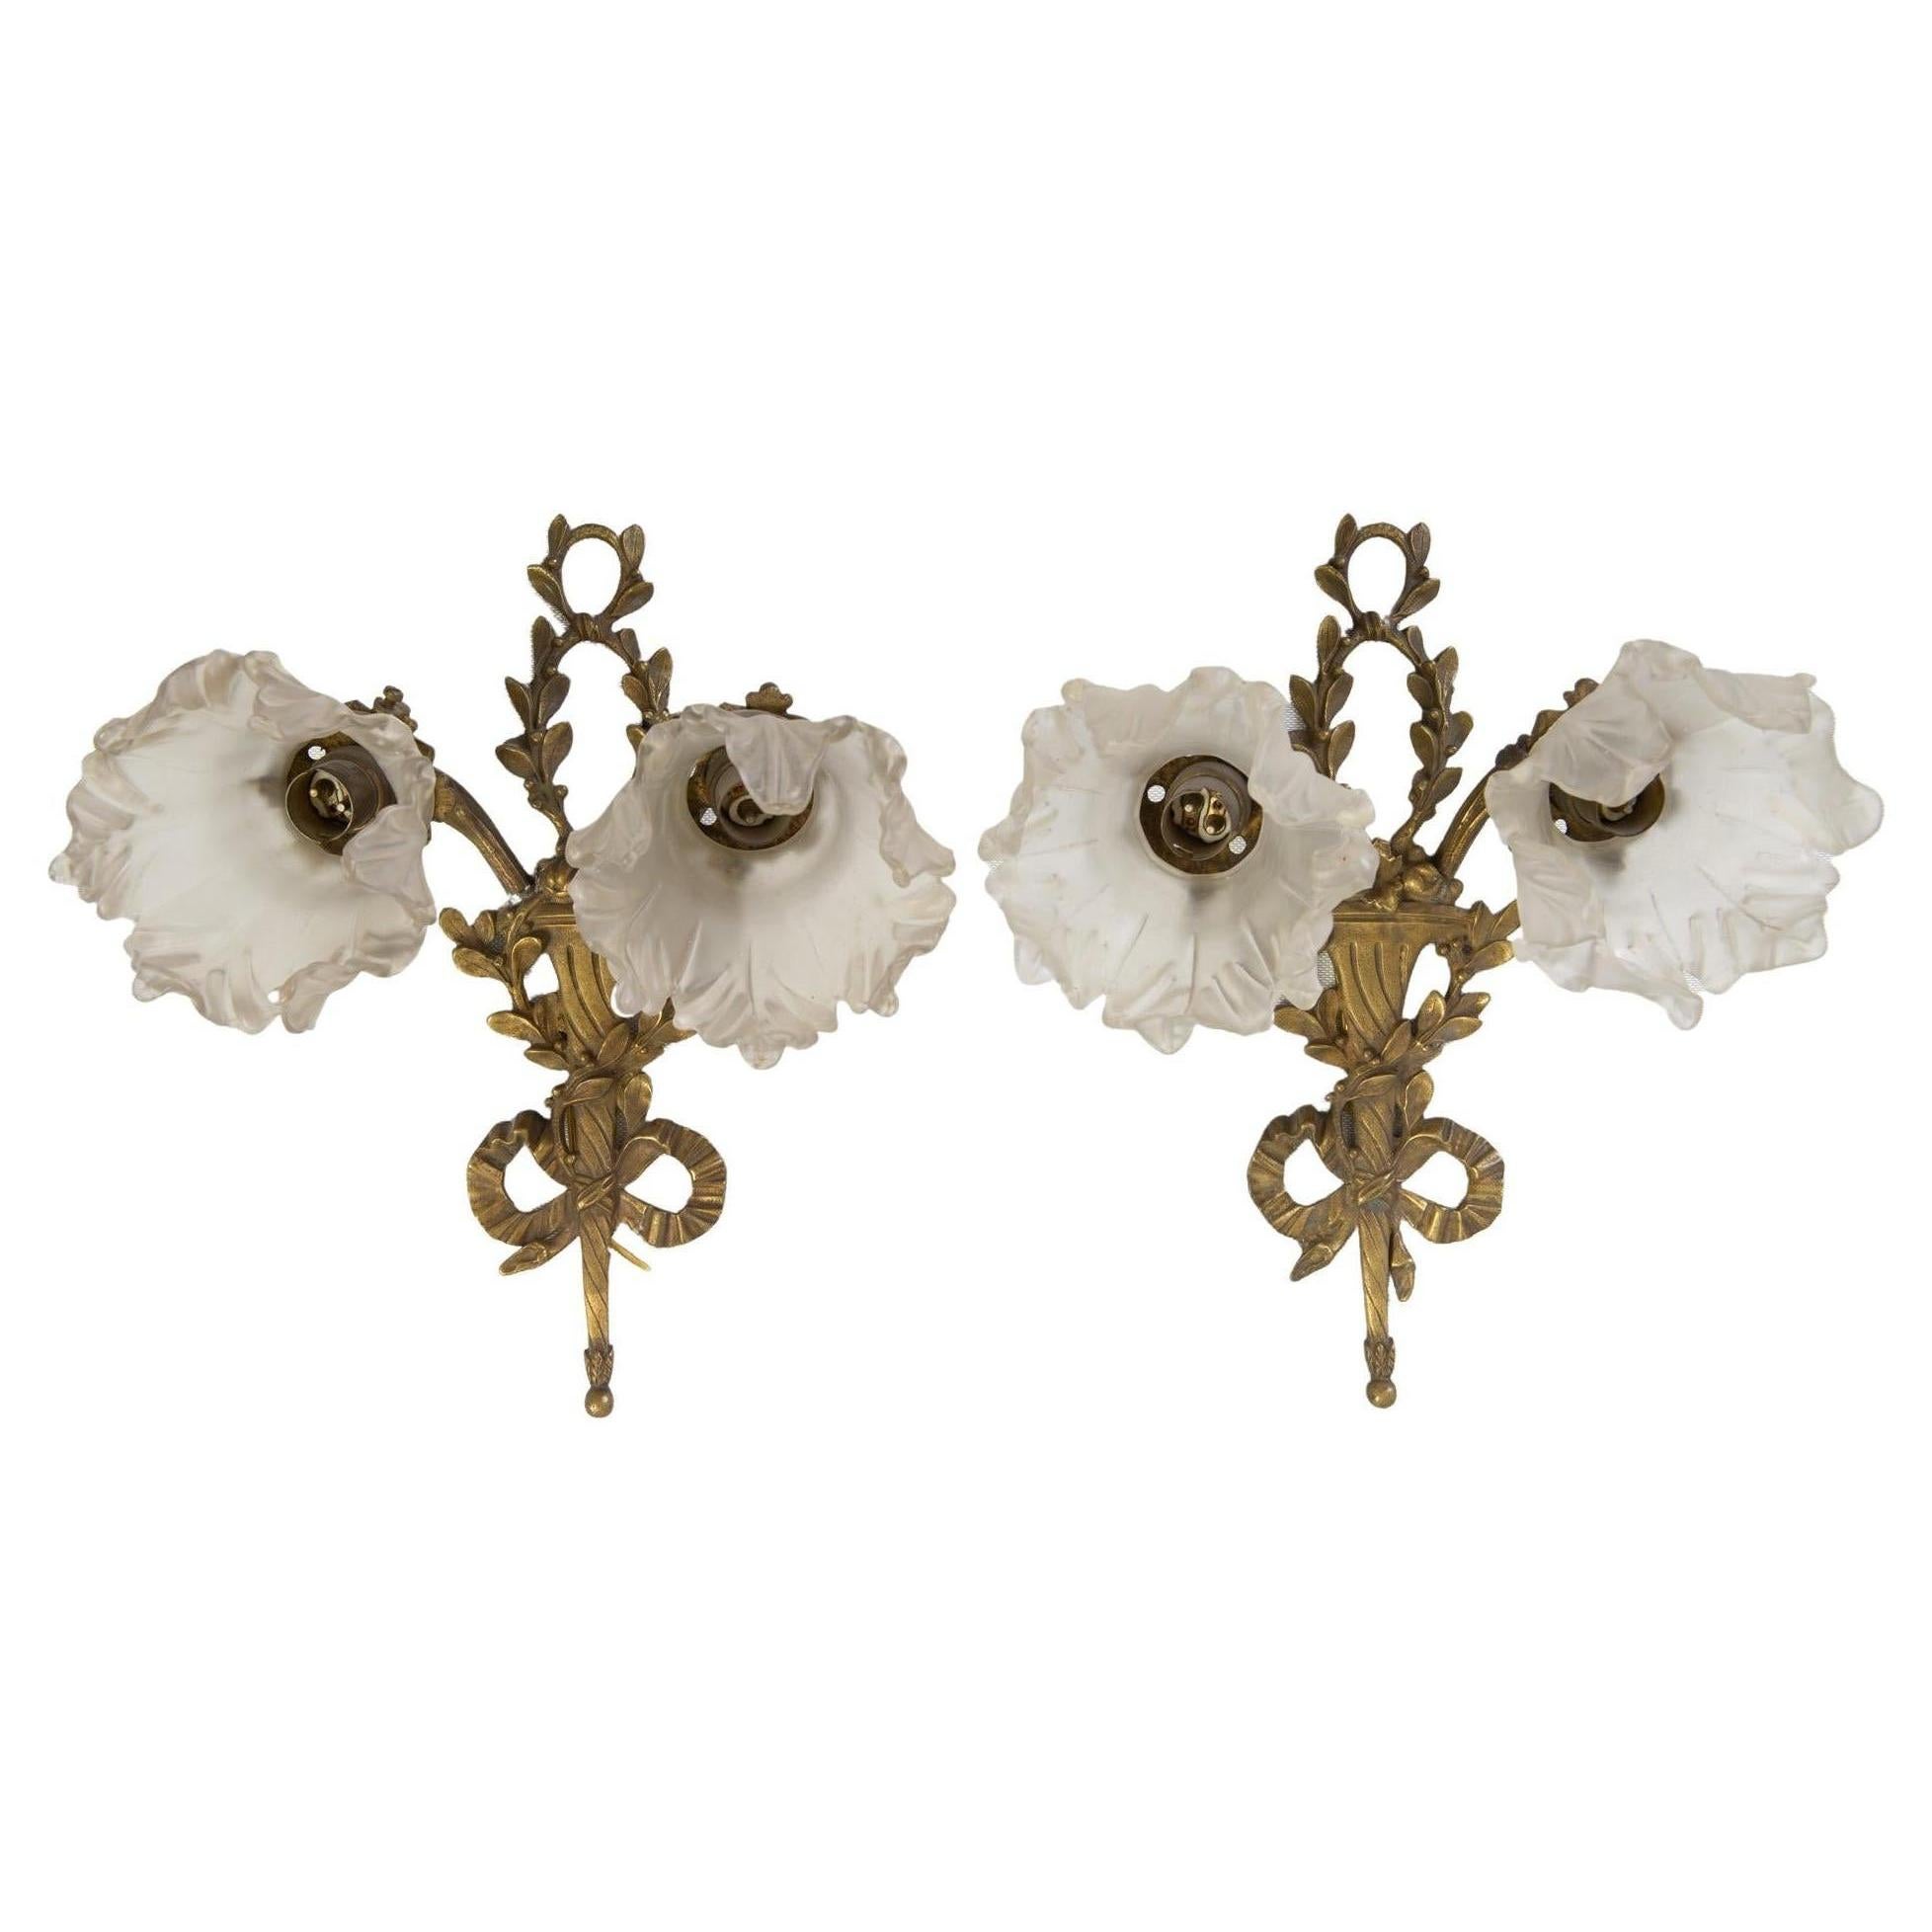 Pair of Antique French Sconces For Sale